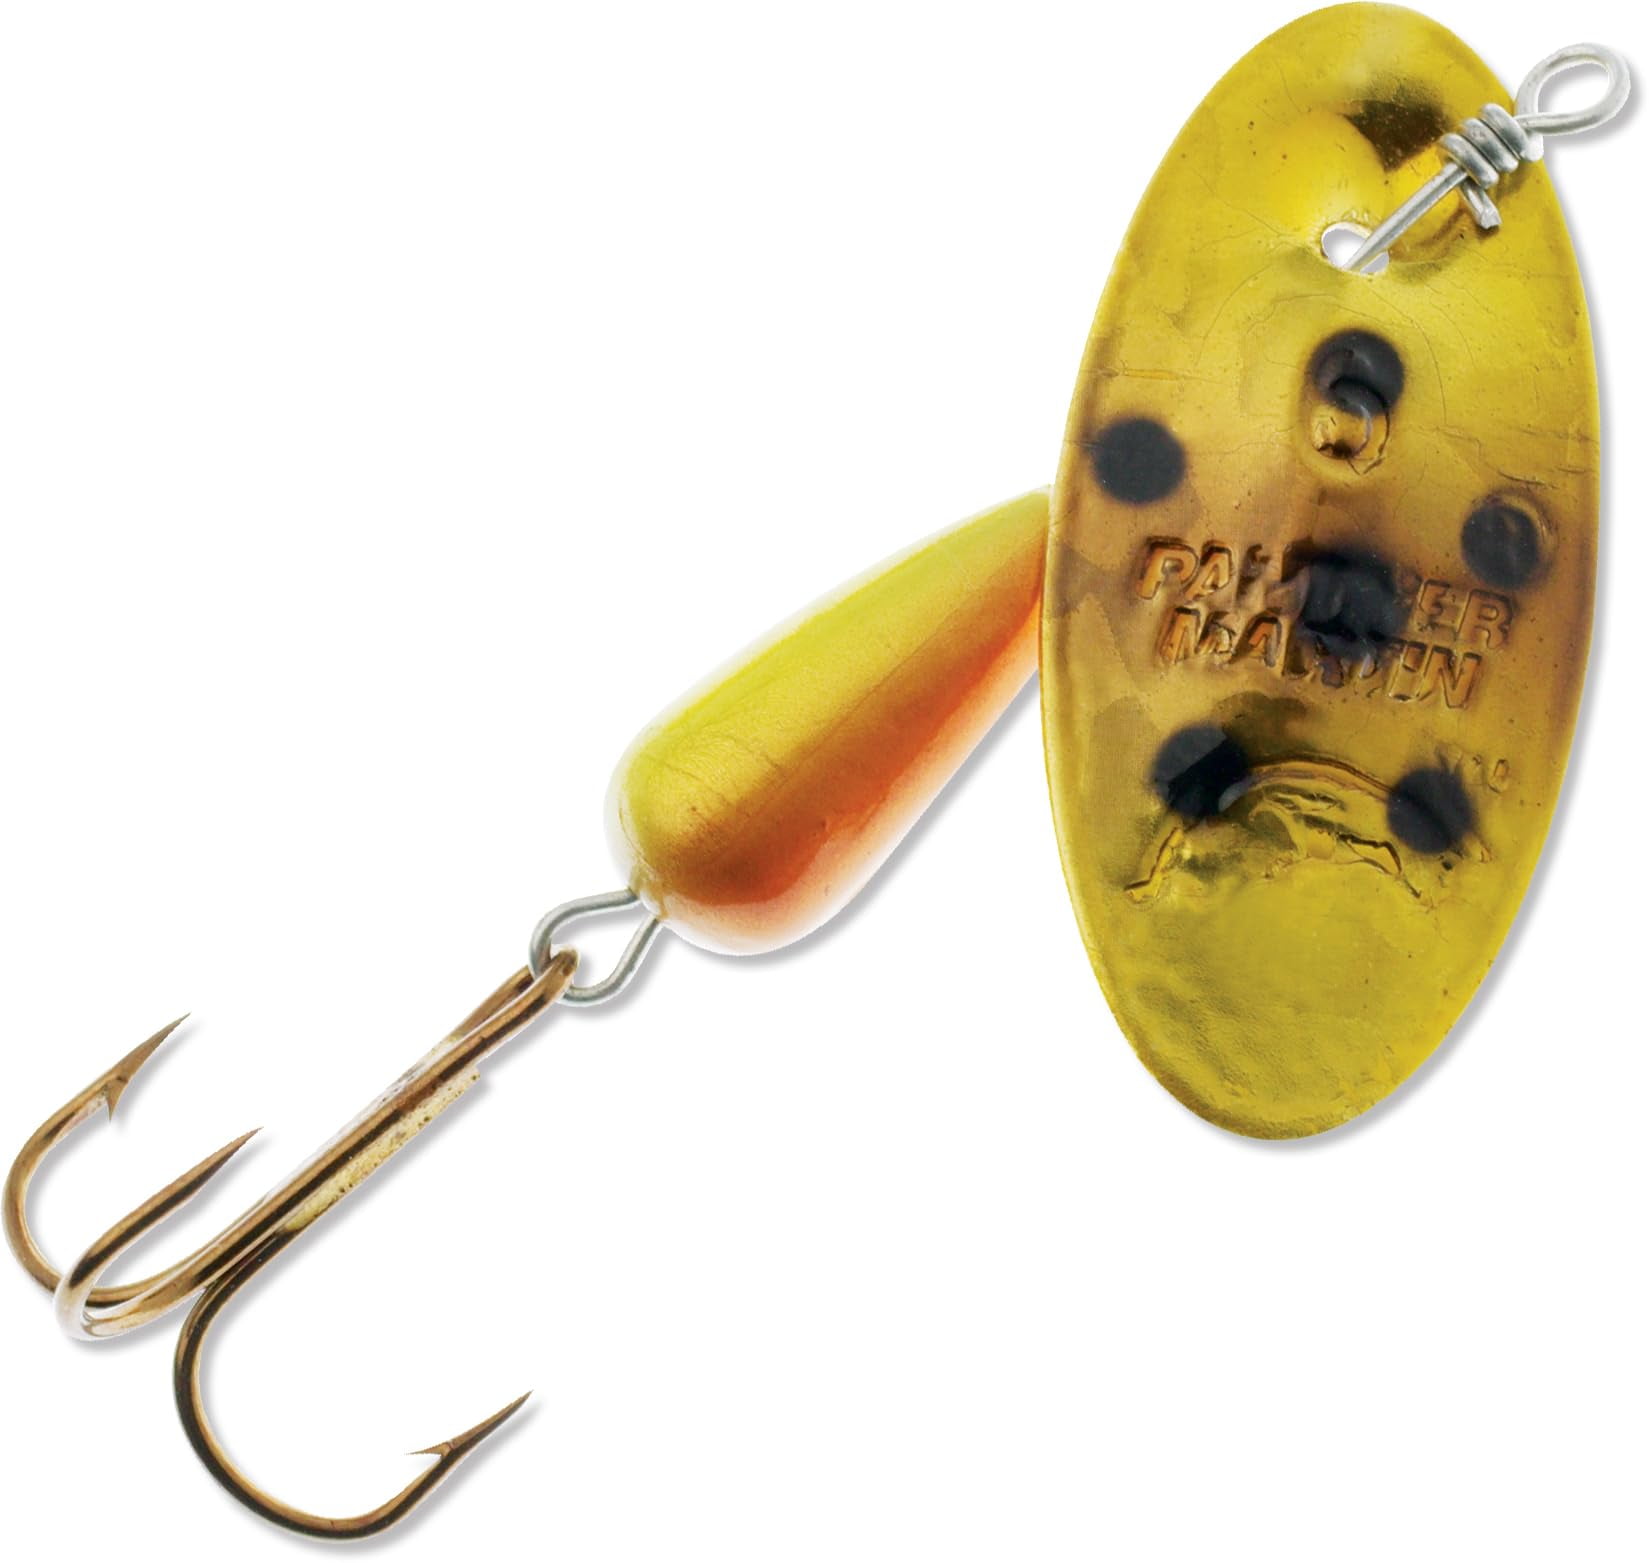 Panther Martin PMH_6_SPB Classic Holographic Spinners Fishing Lure